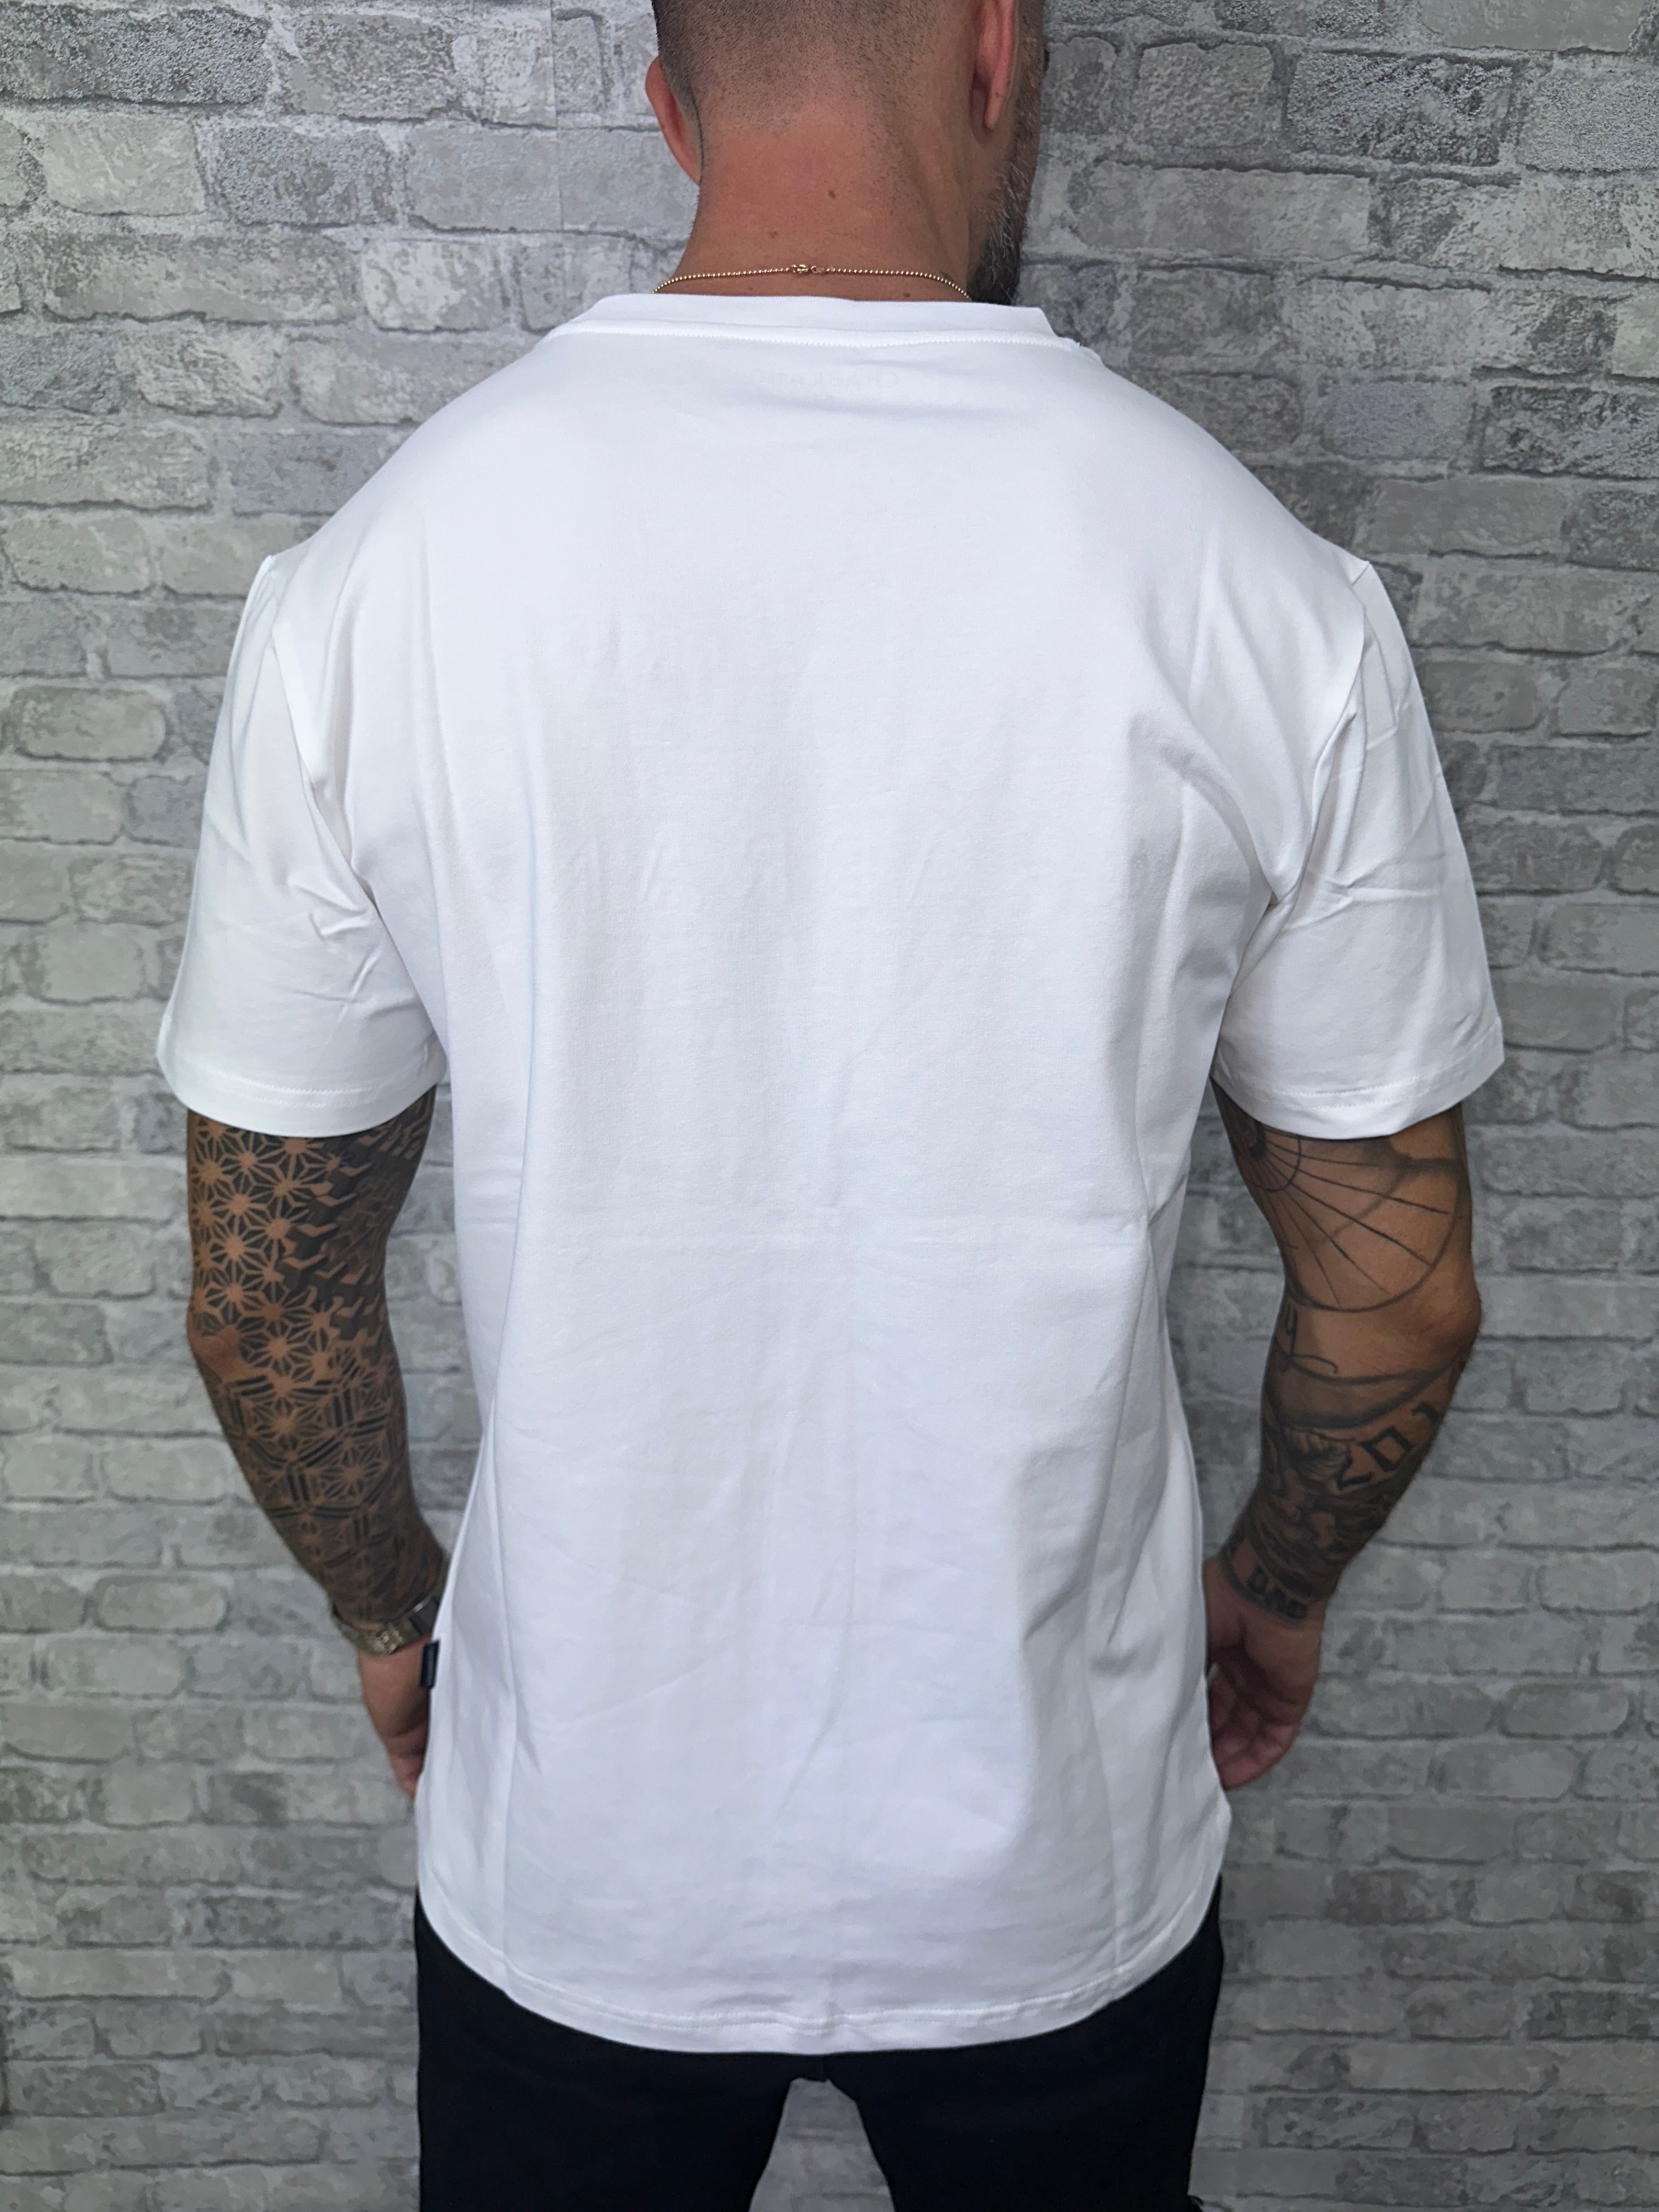 CHABRAND - White relief T-shirt